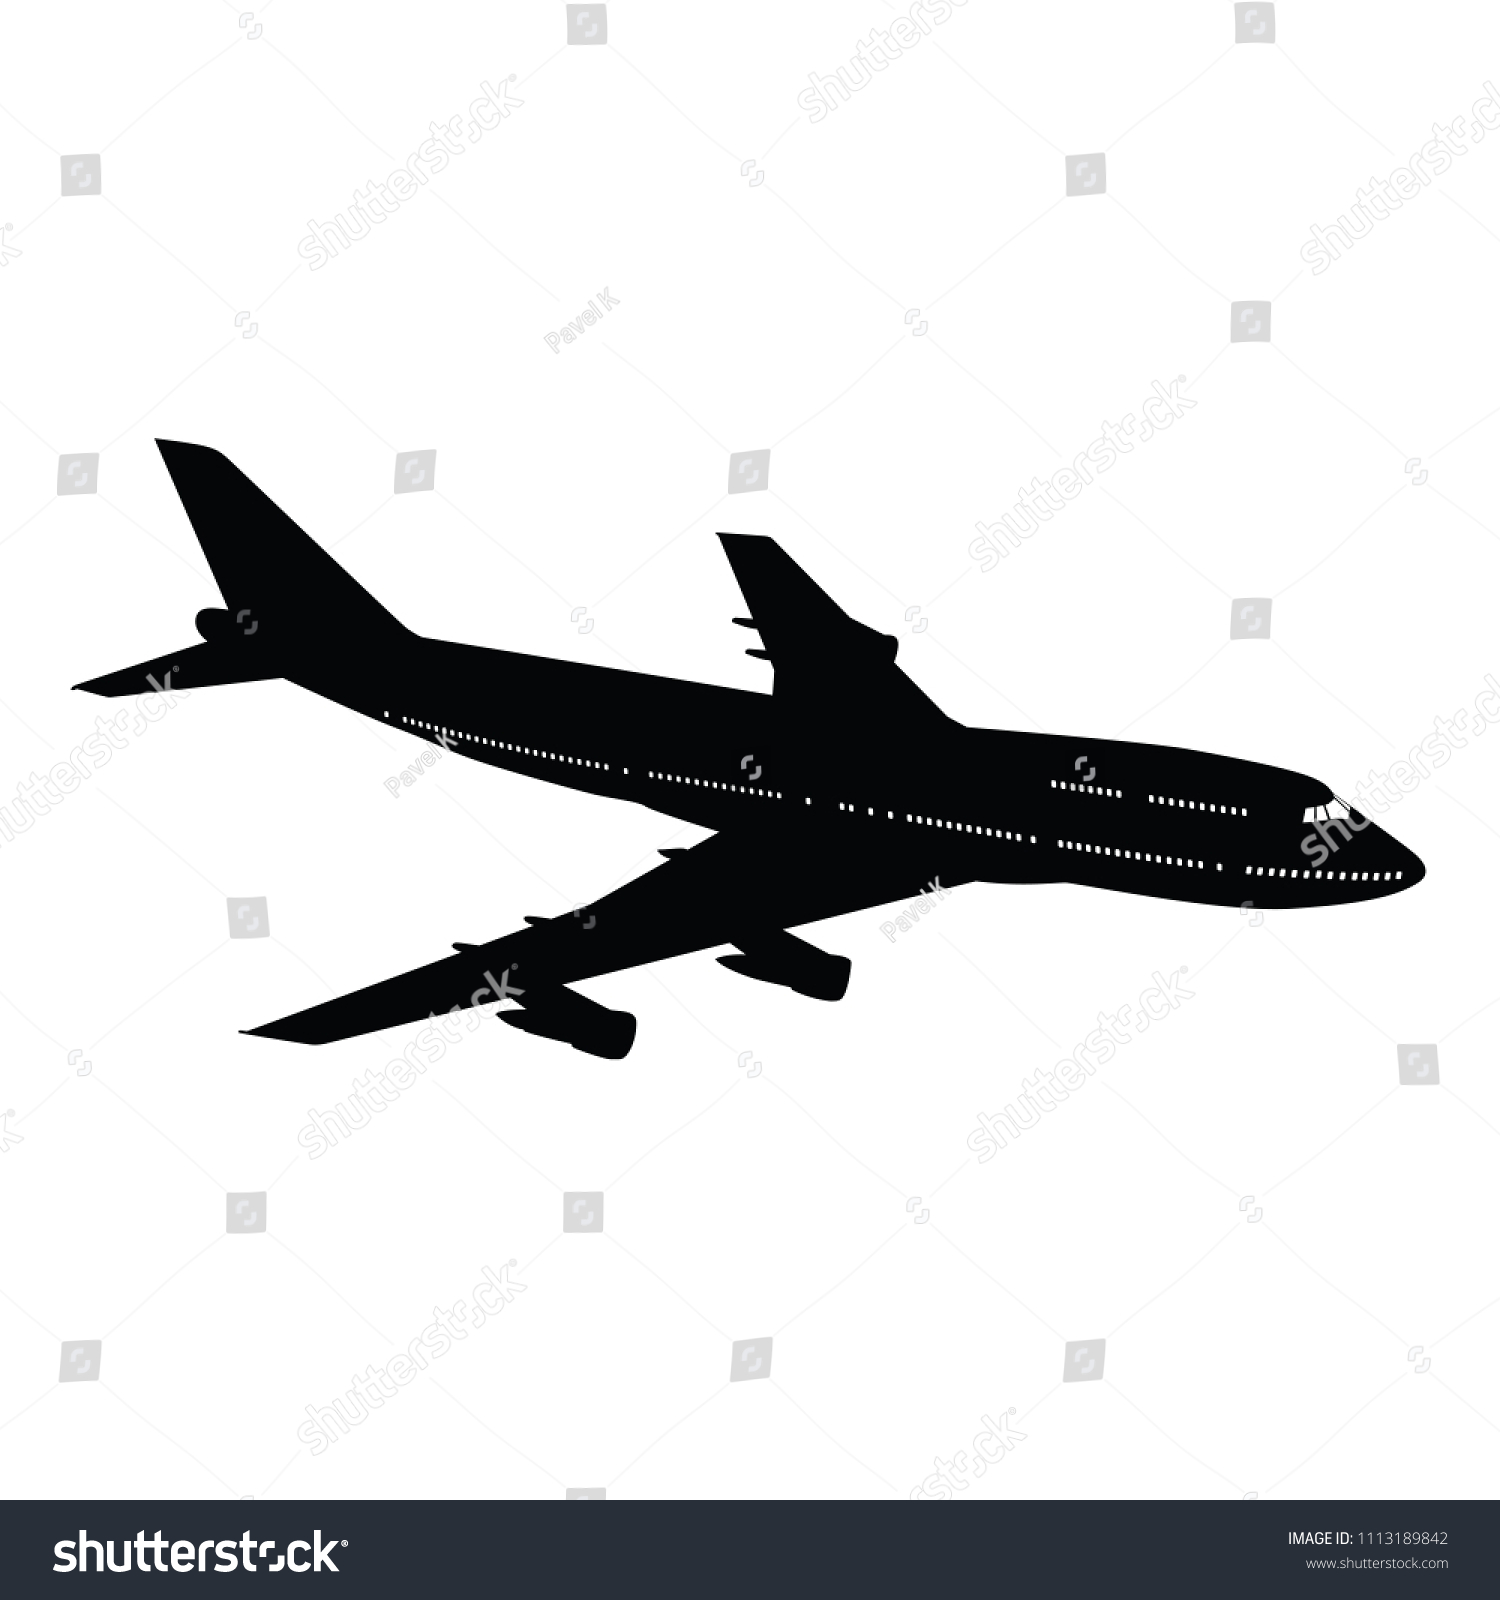 SVG of Airplane silhouette on white background. Vector illustration. svg